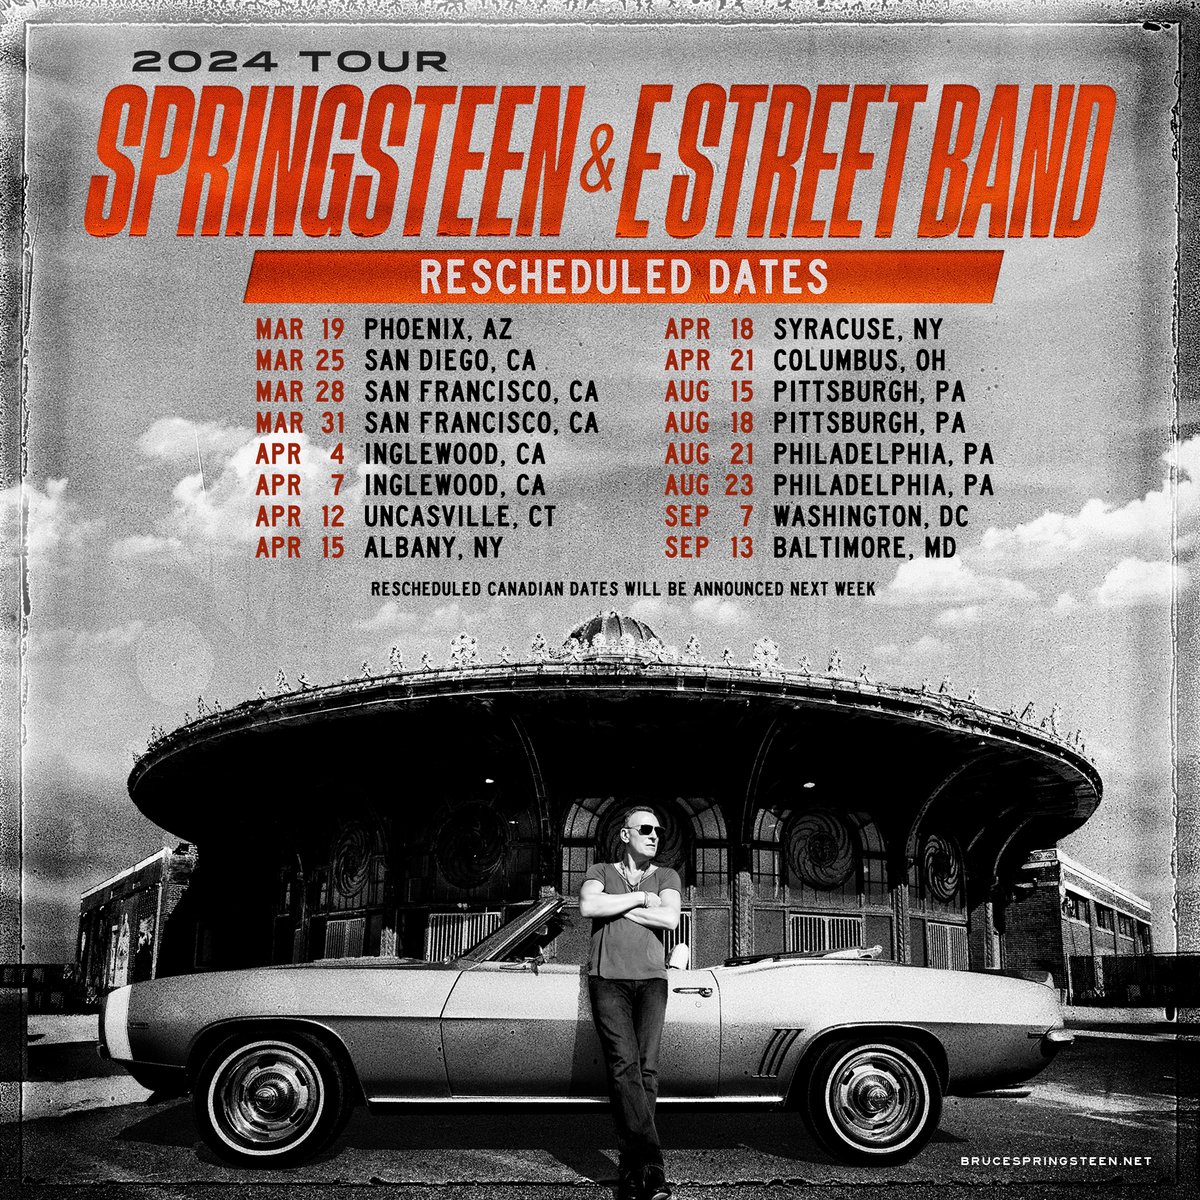 Bruce Springsteen and The E Street Band's postponed U.S. tour dates have been rescheduled and announced for 2024: March 19 - Phoenix, AZ @ Footprint Center (rescheduled from Nov. 30, 2023) March 25 - San Diego, CA @ Pechanga Arena (rescheduled from Dec. 2, 2023) March 28 - San